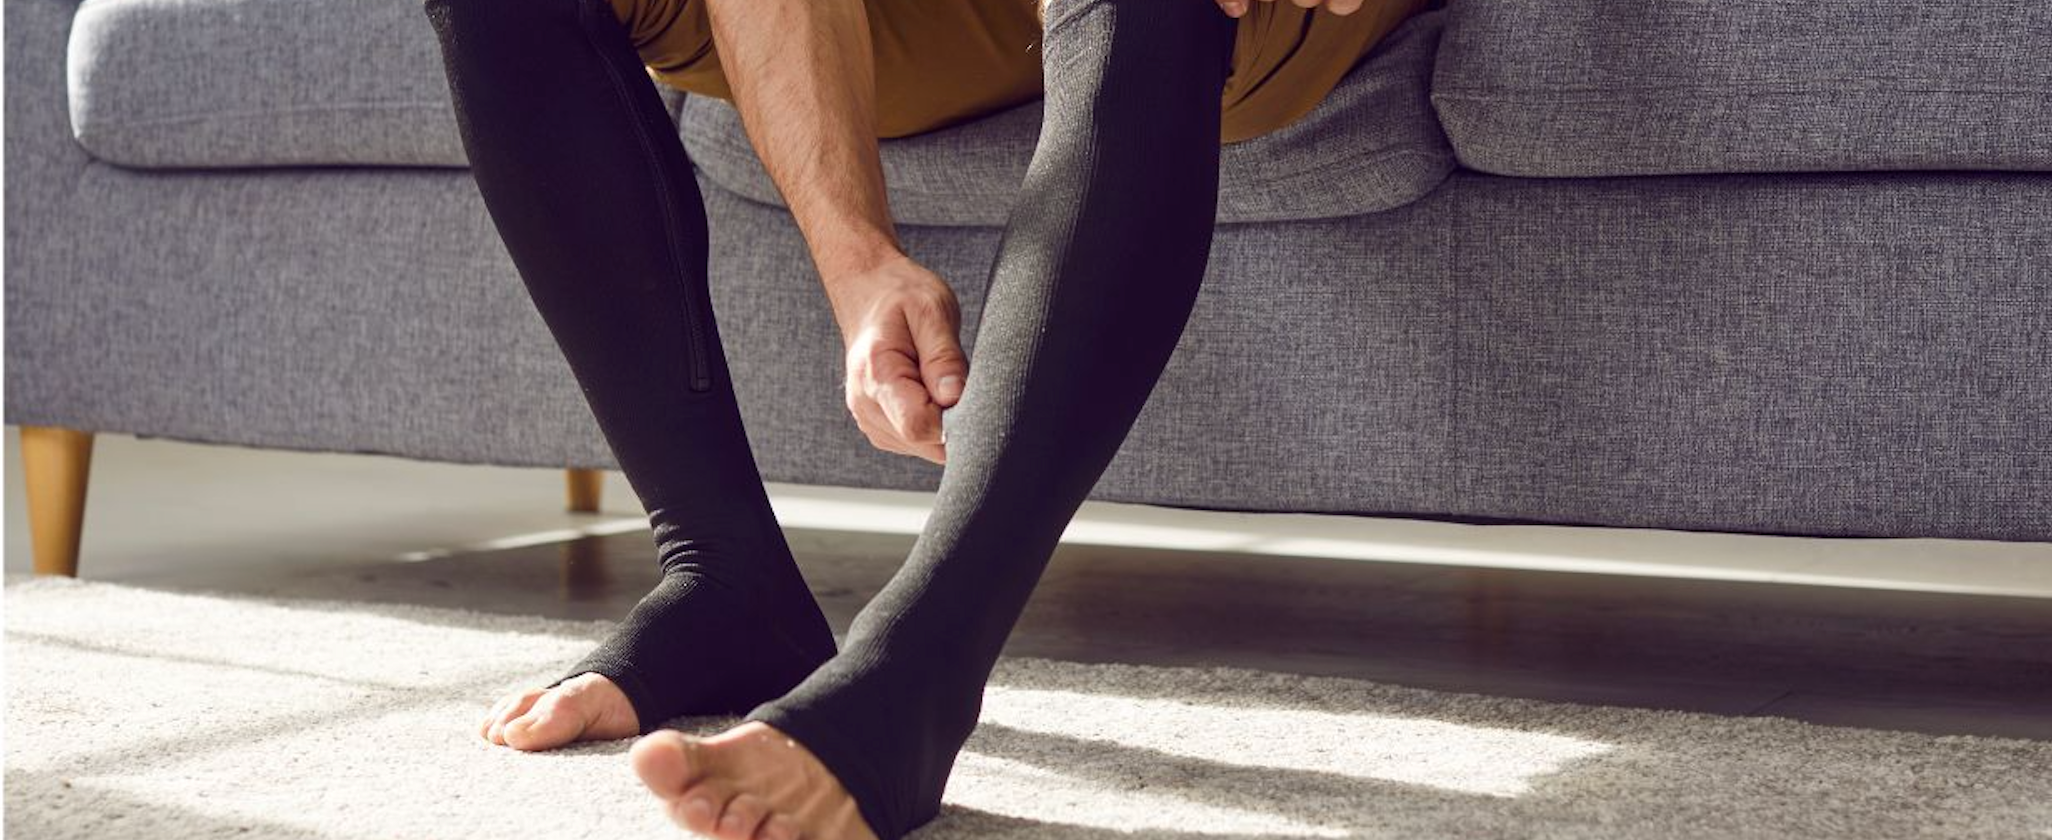 How Long Do You Wear Compression Socks After Surgery? – Dunn Medical